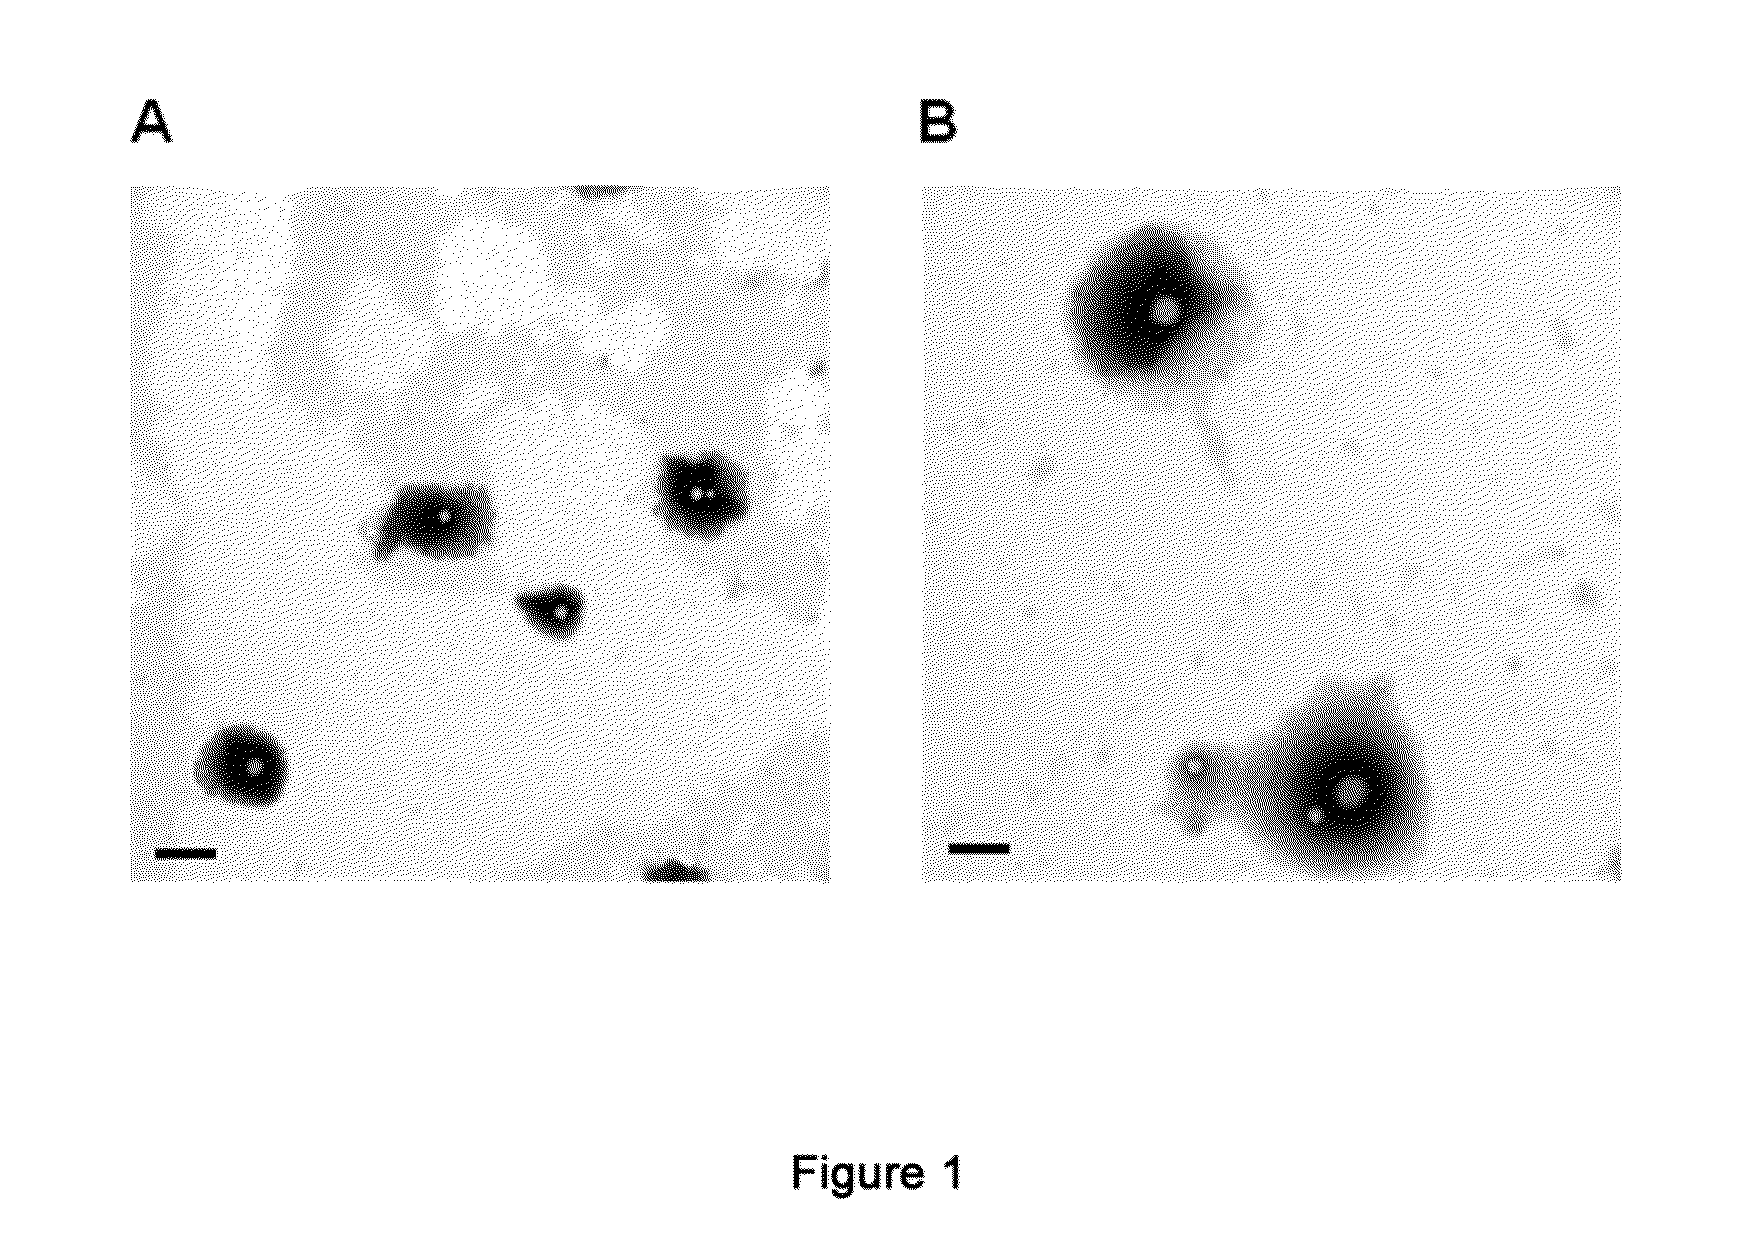 Nanoparticles for encapsulation of compounds, the production and uses thereof